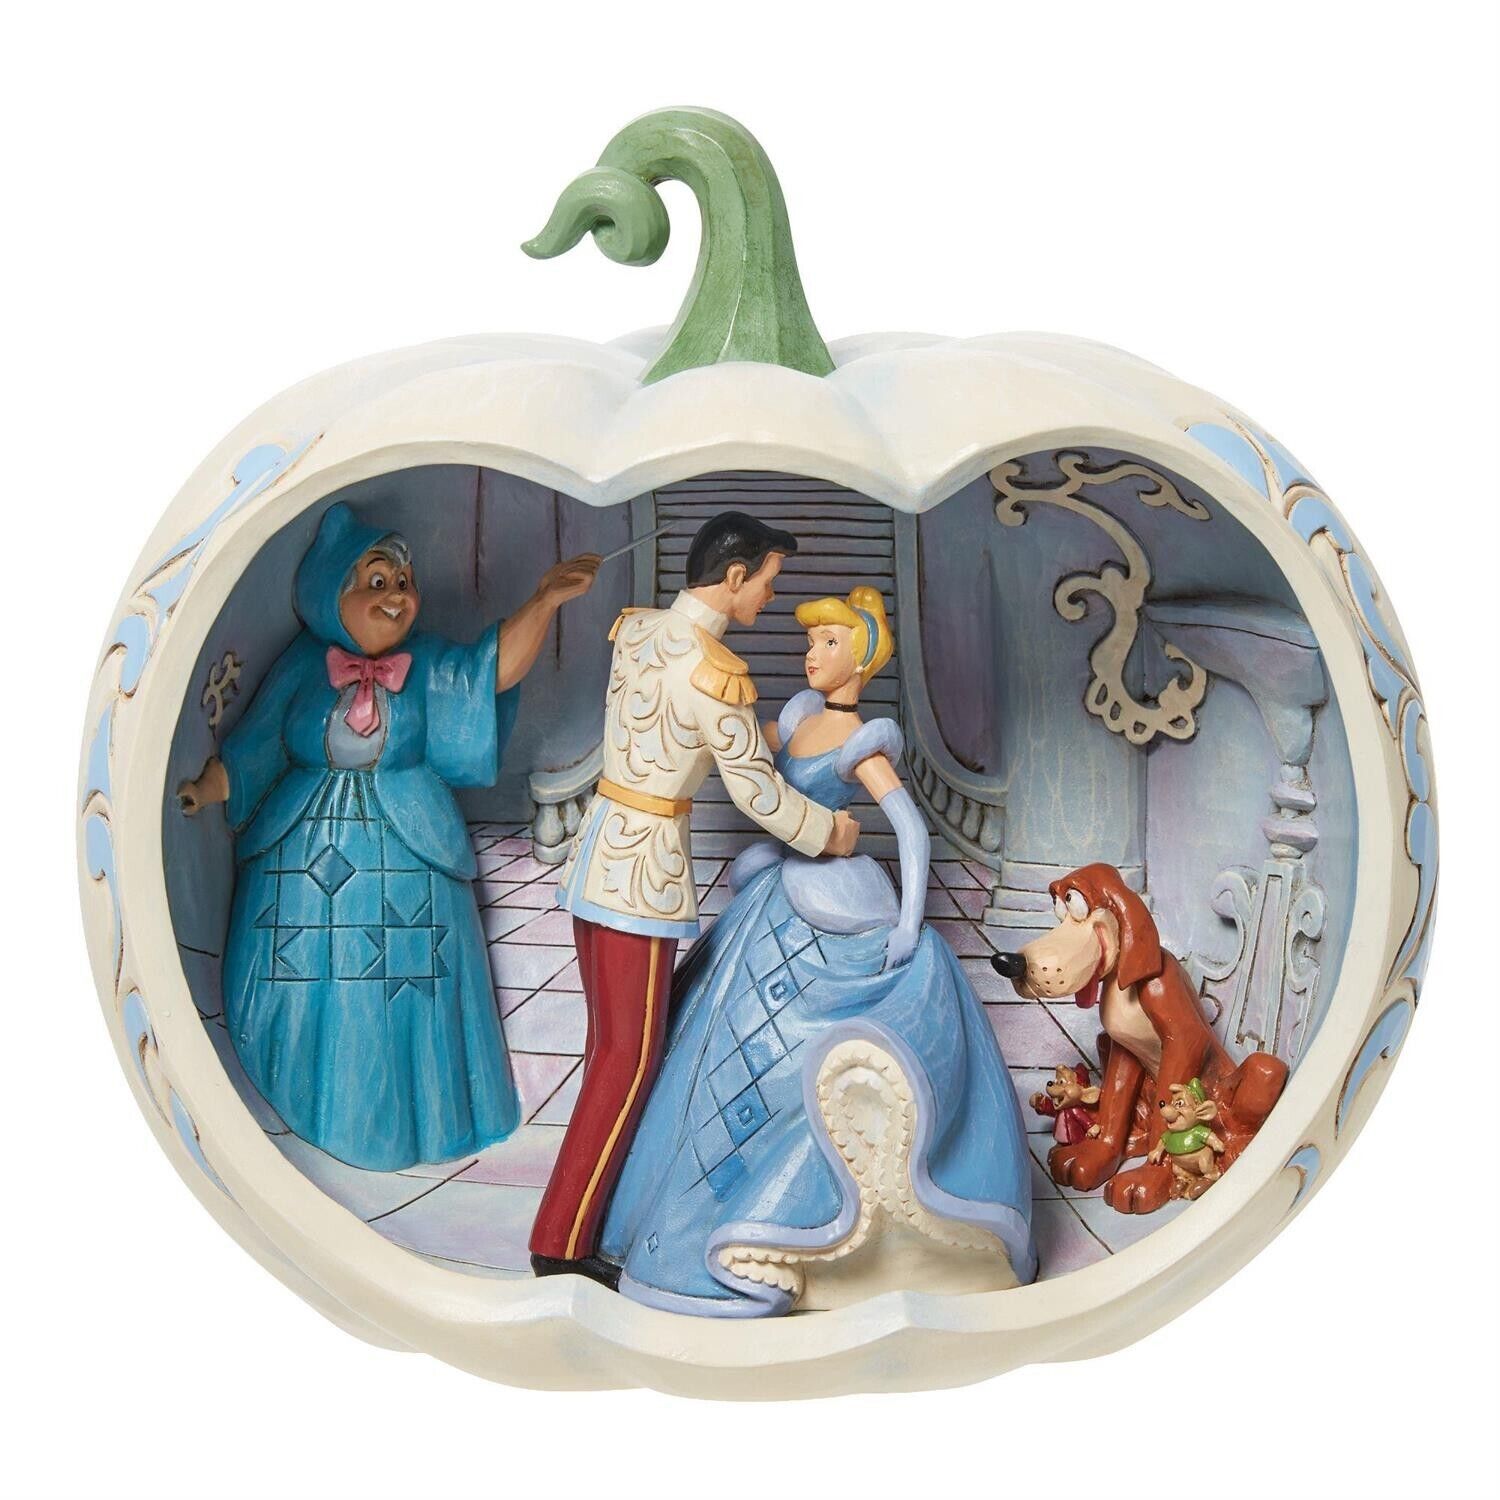 Jim Shore Disney Traditions - Love at First Sight - Cinderella Carriage 6011926